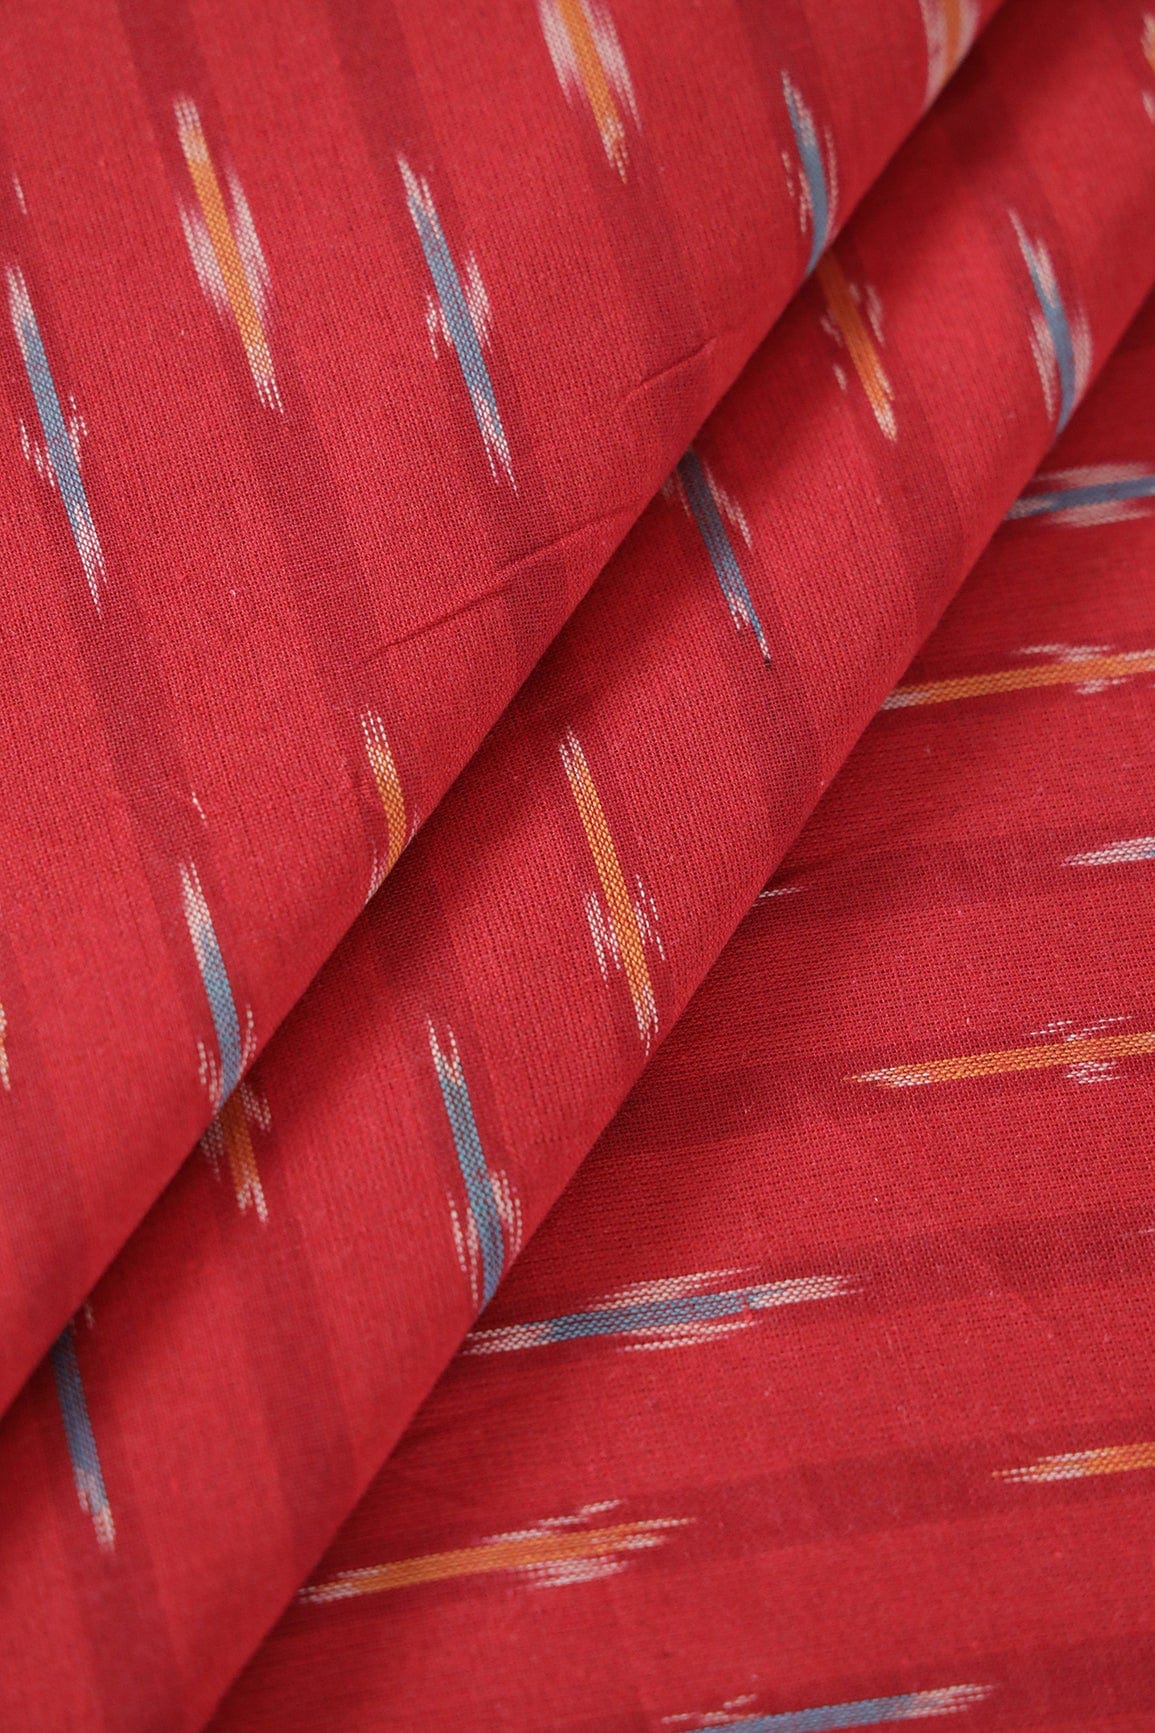 doeraa Hand Woven Red And Yellow Stripes Pattern Handwoven Ikat Organic Cotton Fabric